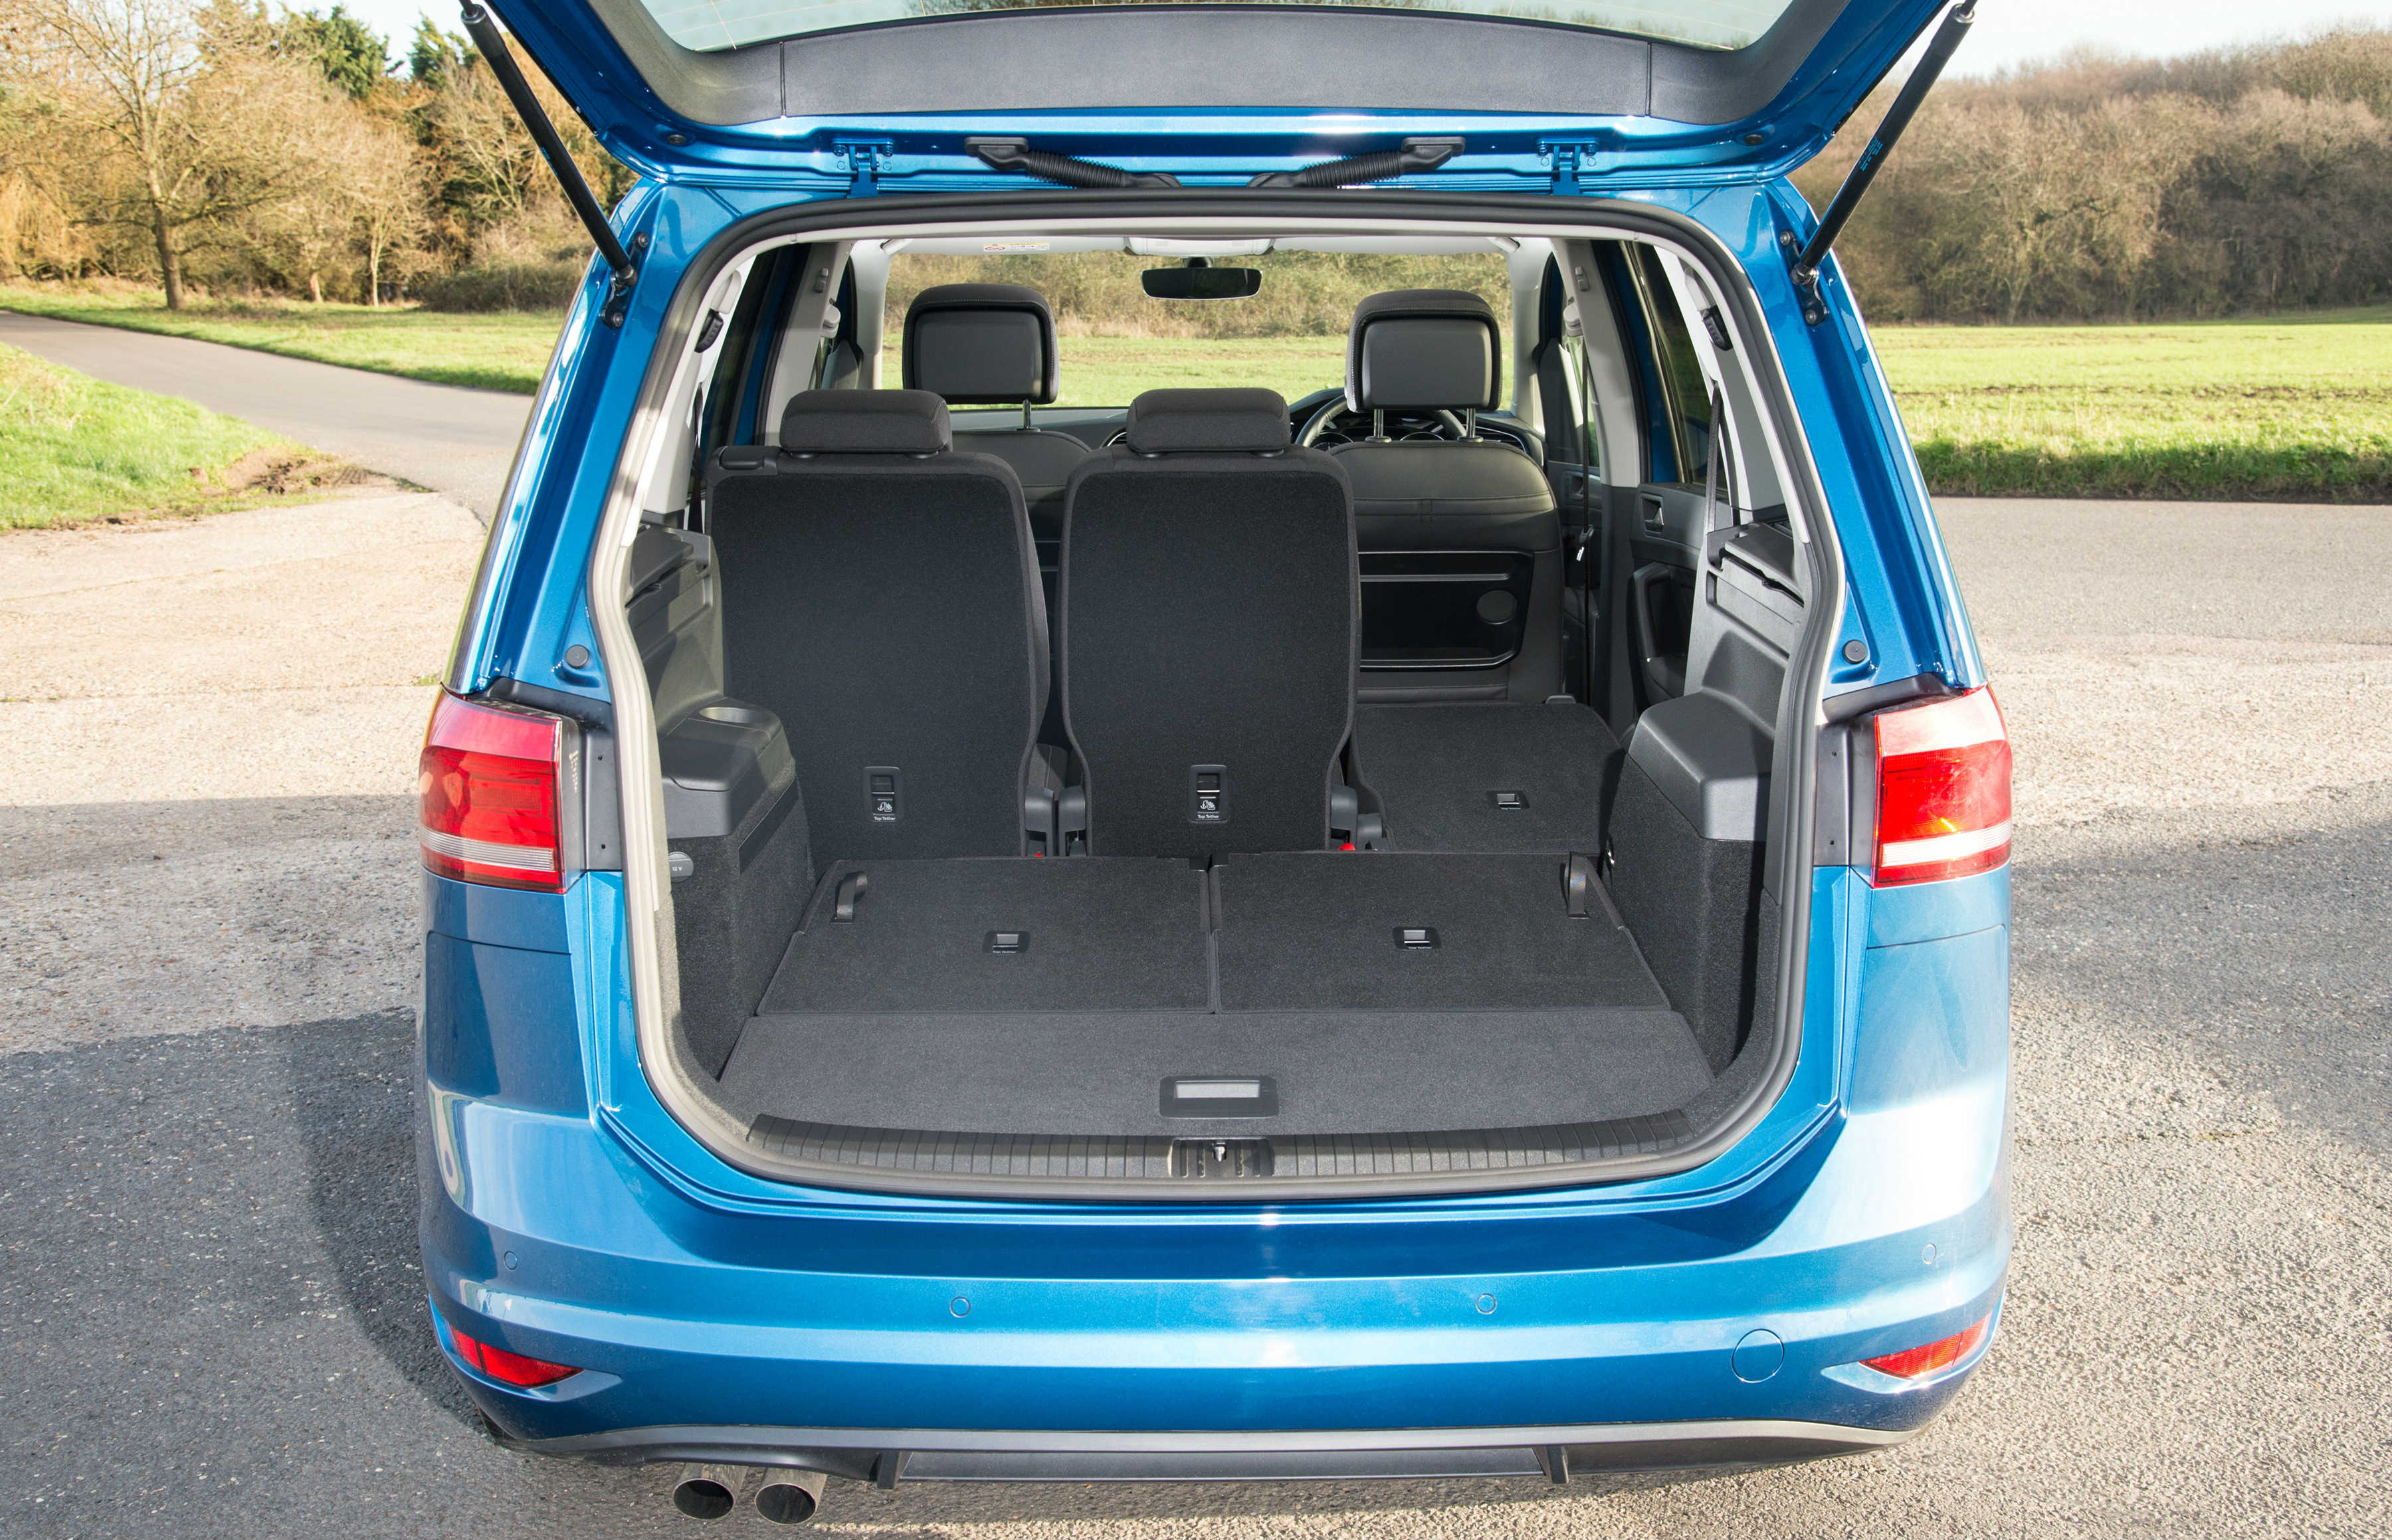 Review of the 2016 VW Touran